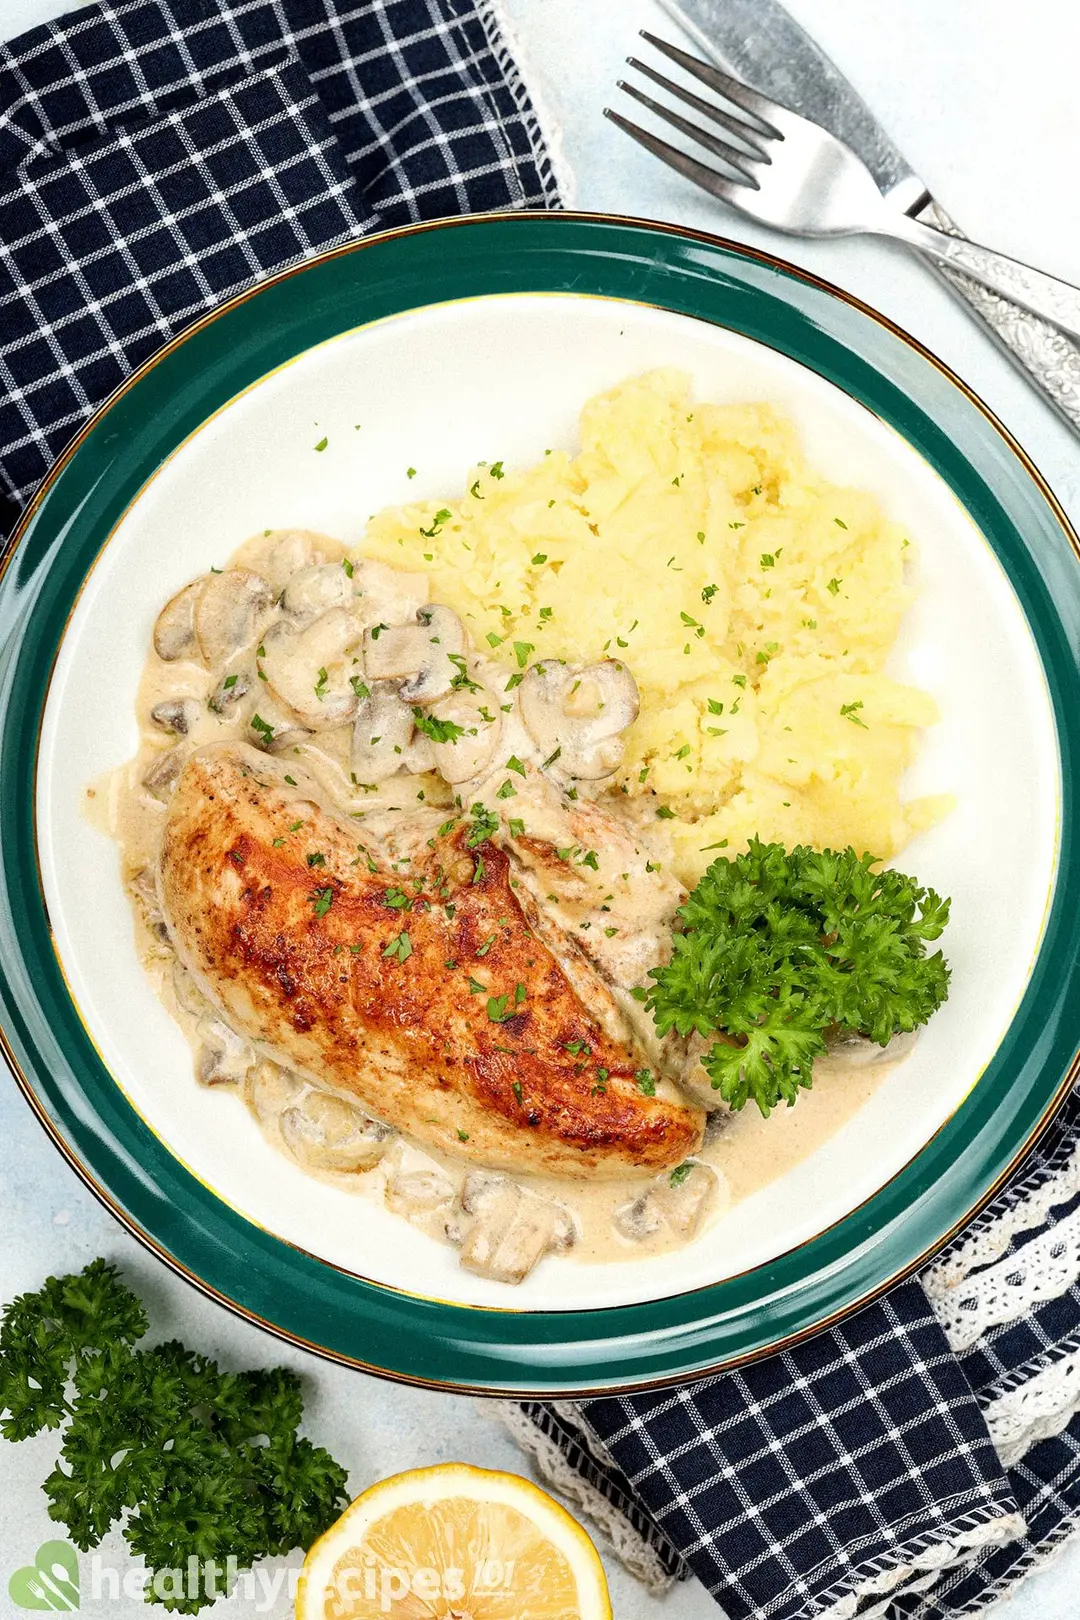 a plate of cooked chicken breast with mushroom and mashed potatoes, garnished with parsley and chopped parsley